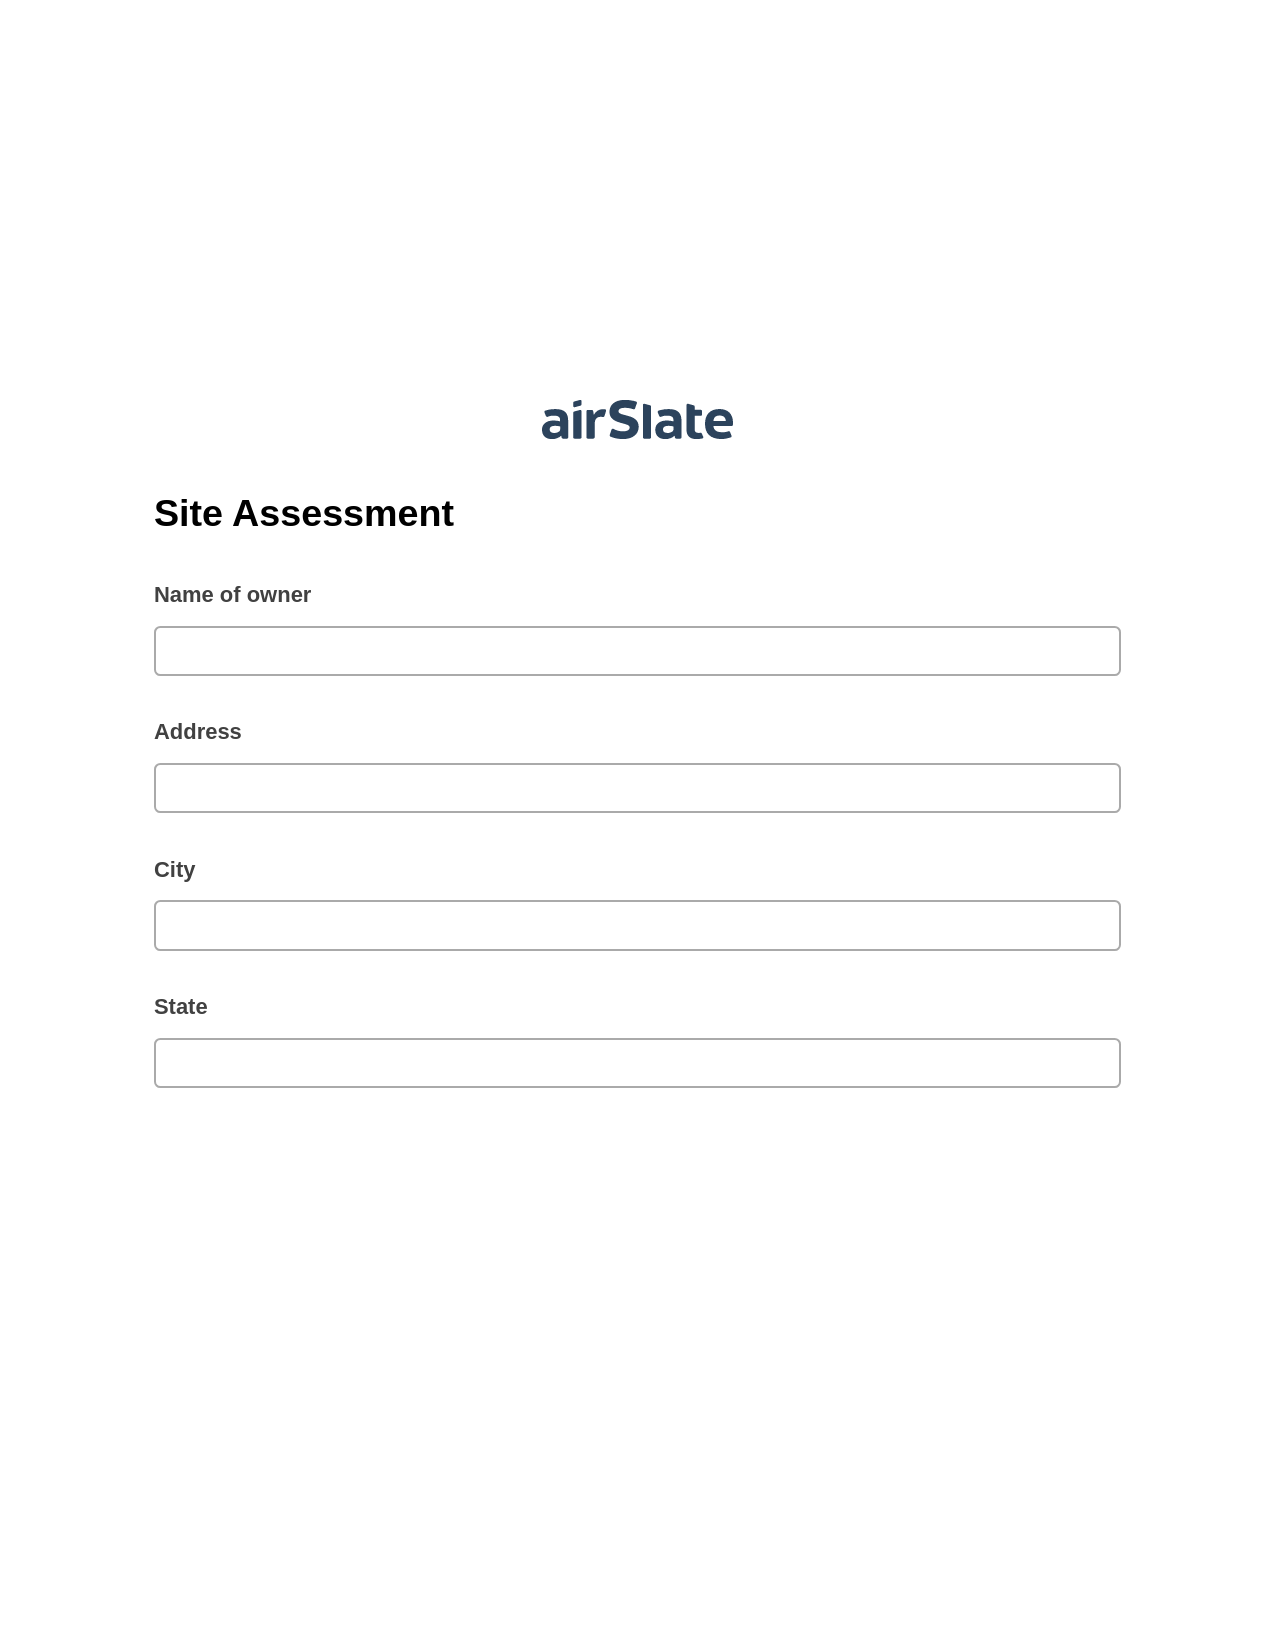 Multirole Site Assessment Pre-fill from Salesforce Record Bot, Unassign Role Bot, Export to Smartsheet